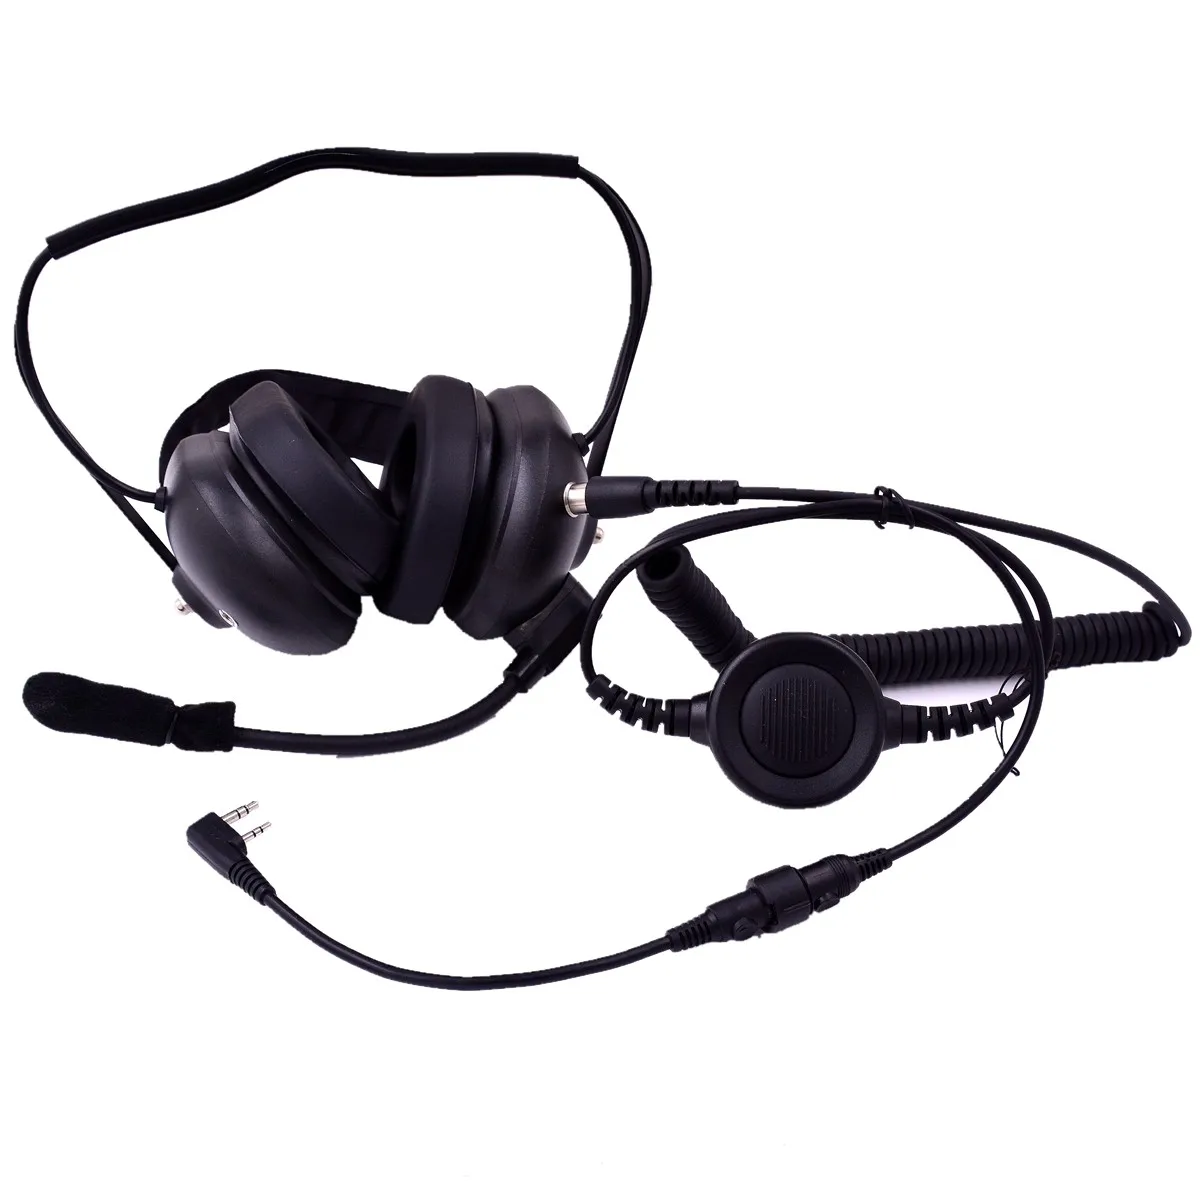 

Heavy Duty Noise Cancelling Head Headset AVIATION COMTAC MILITARY TACTICAL Earpiece 2 Pins Air Racing Shooting PTT Microphone